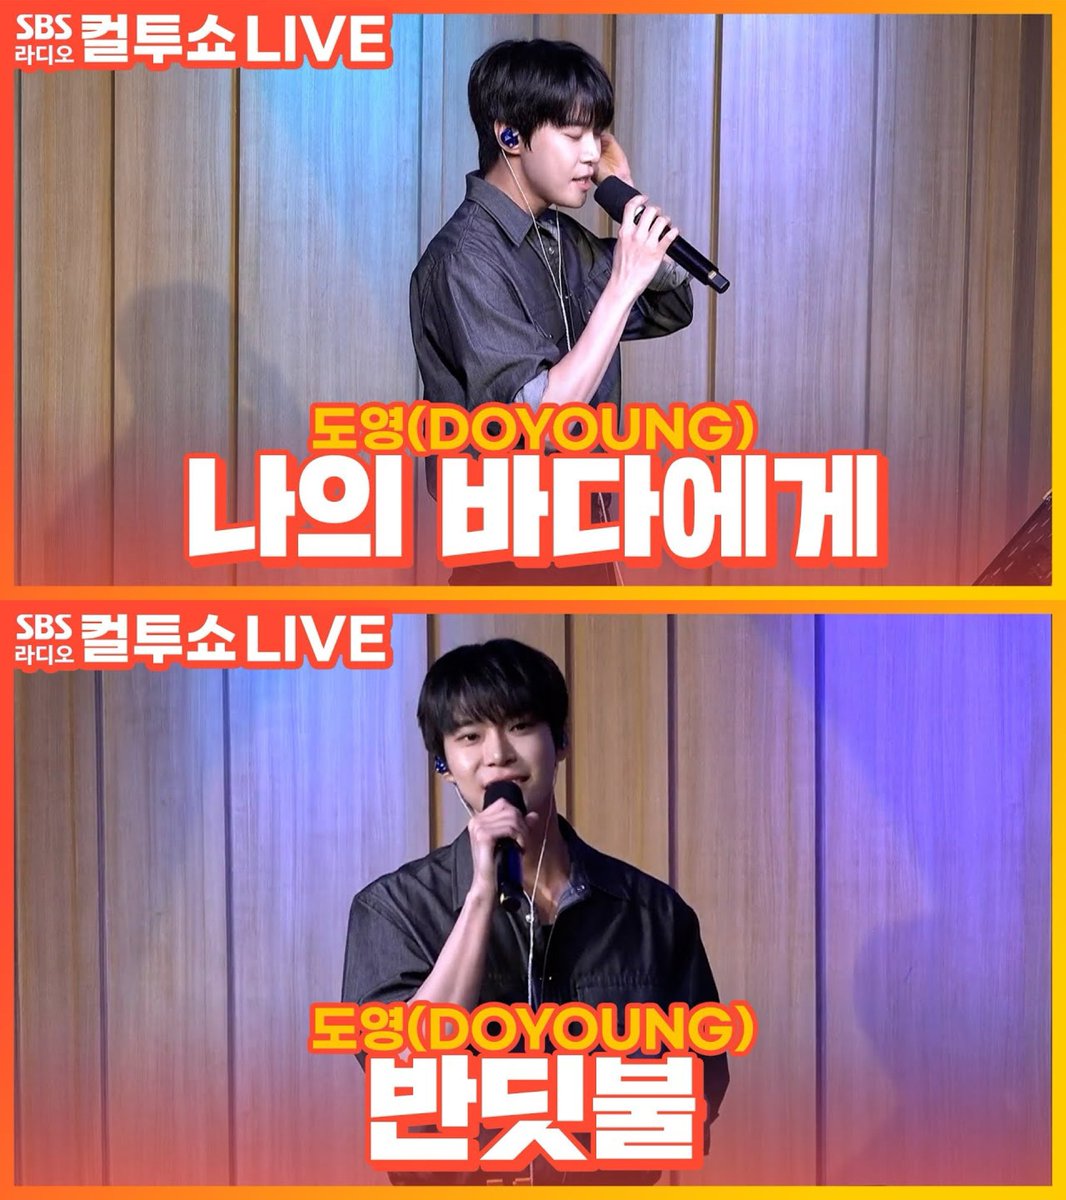 [VIDEO] 240423 #DOYOUNG at the SBS Power FM Cultwo Show • '나의 바다에게 (From Little Wave)' youtu.be/11-o7h-kCXs • '반딧불 (Little Light)' youtu.be/GFNPiAXdEdM #NCT #NCT127